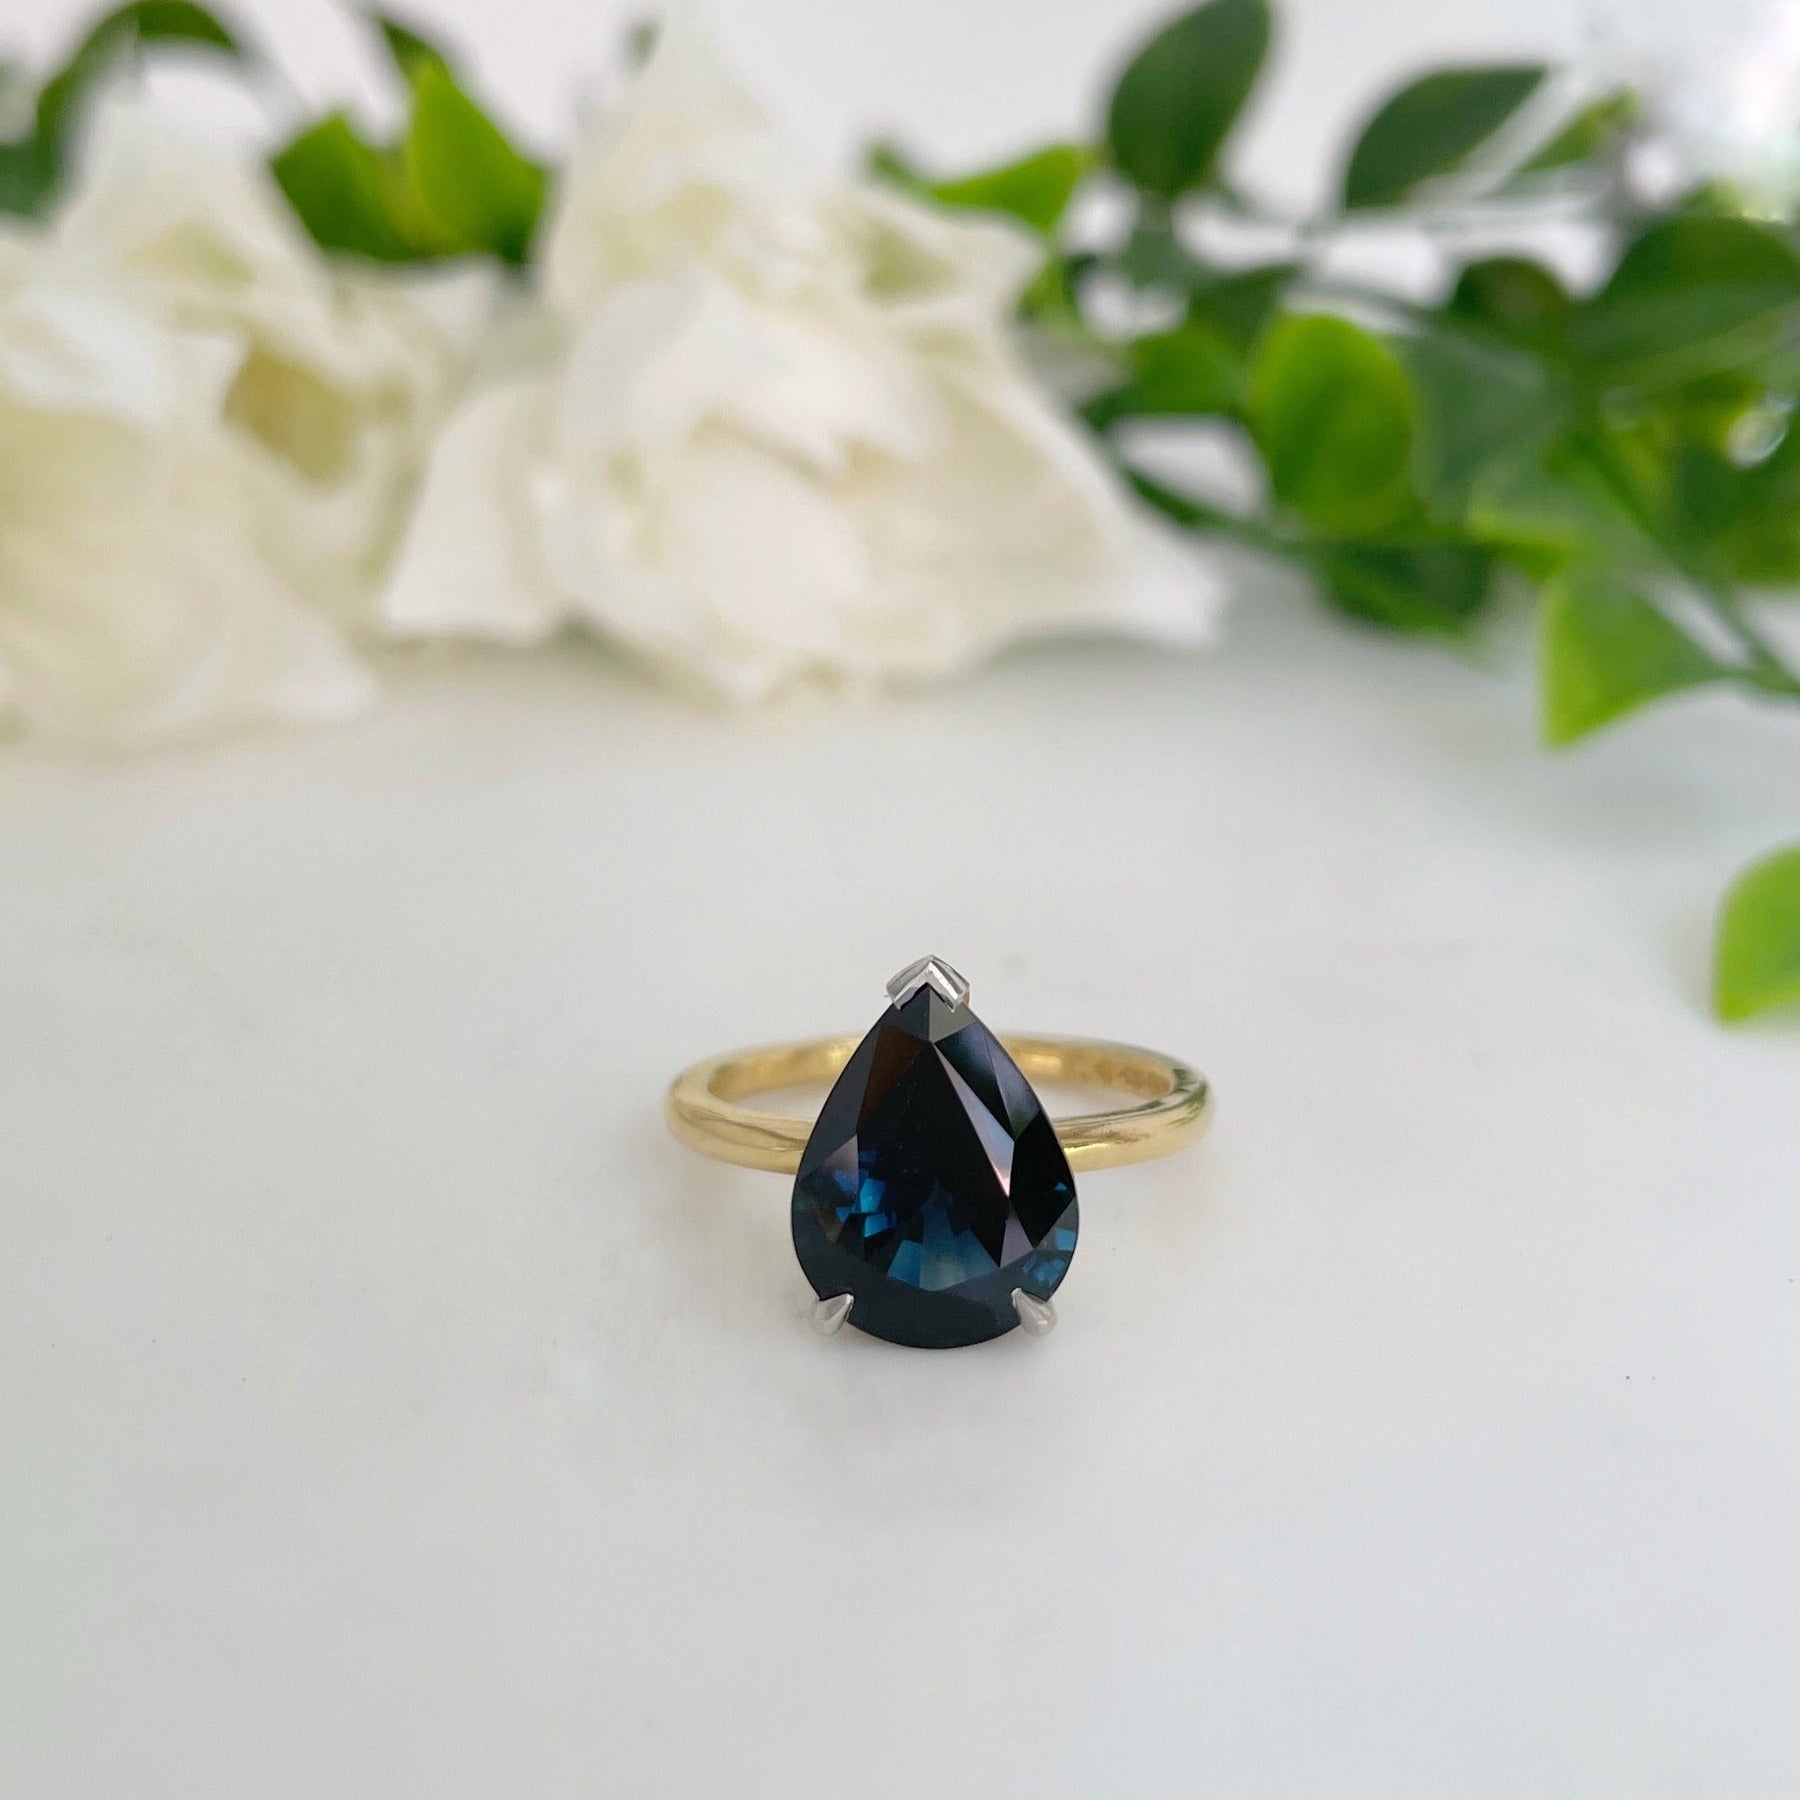 Beautiful Saturn Symbol Sapphire Ring Real Kashmir Color Sapphire Bague  Gift for Her Saturn Design on Both Sides of Ring Womens Jewellery - Etsy